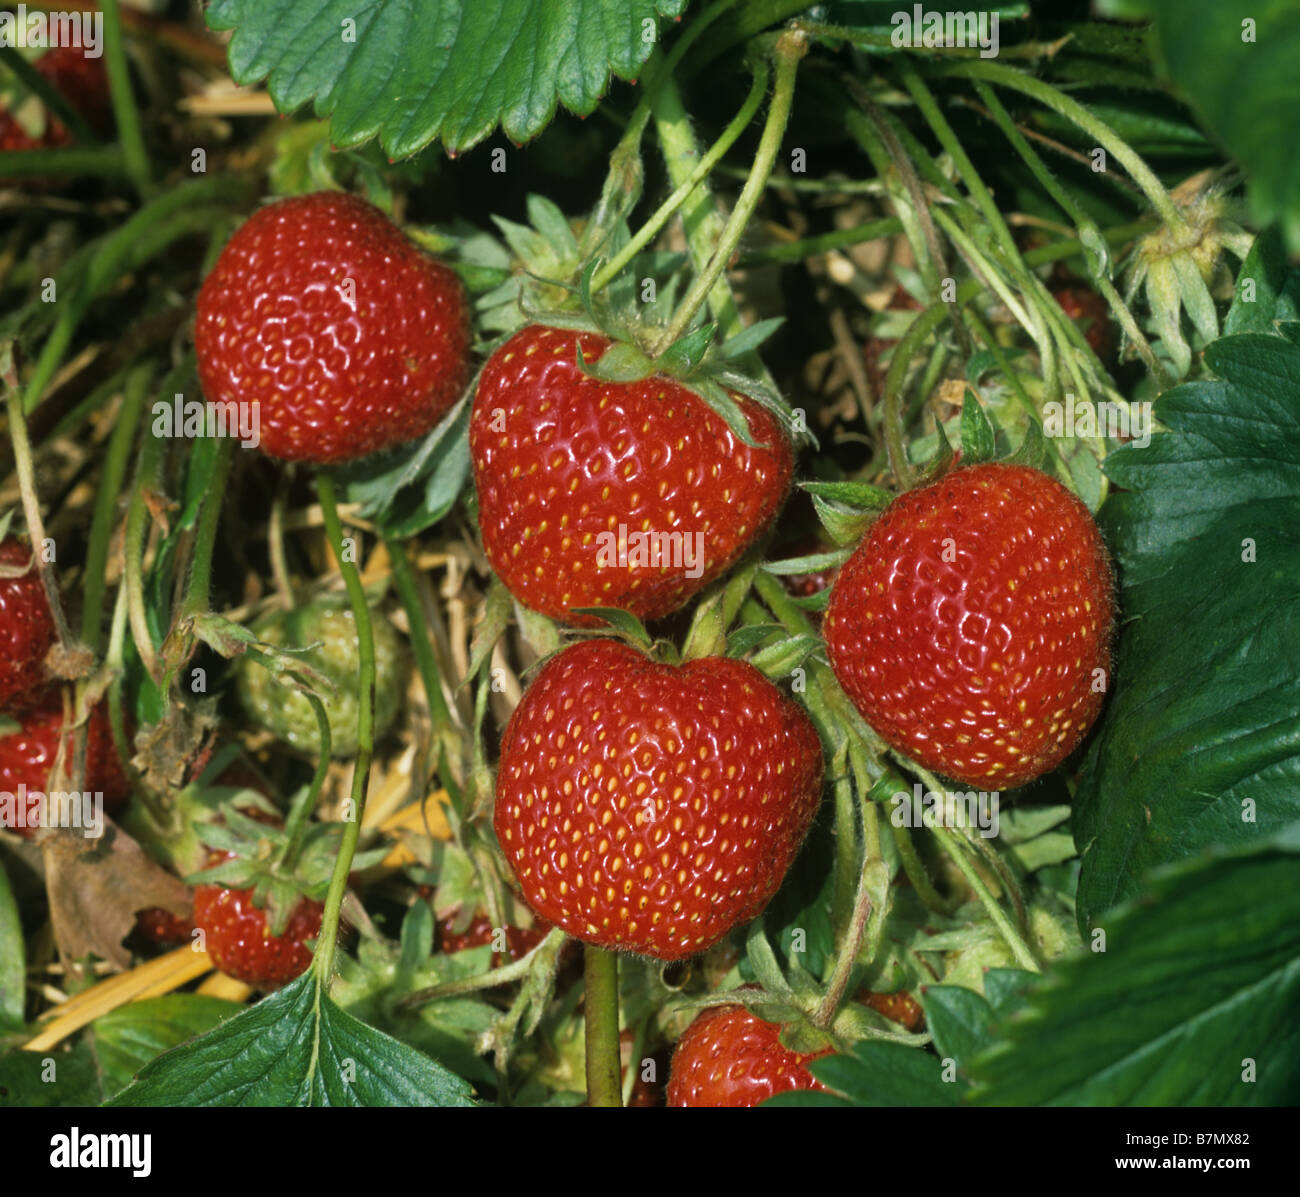 Ripe strawberry fruit on outdoor pick your own English strawberries Stock Photo